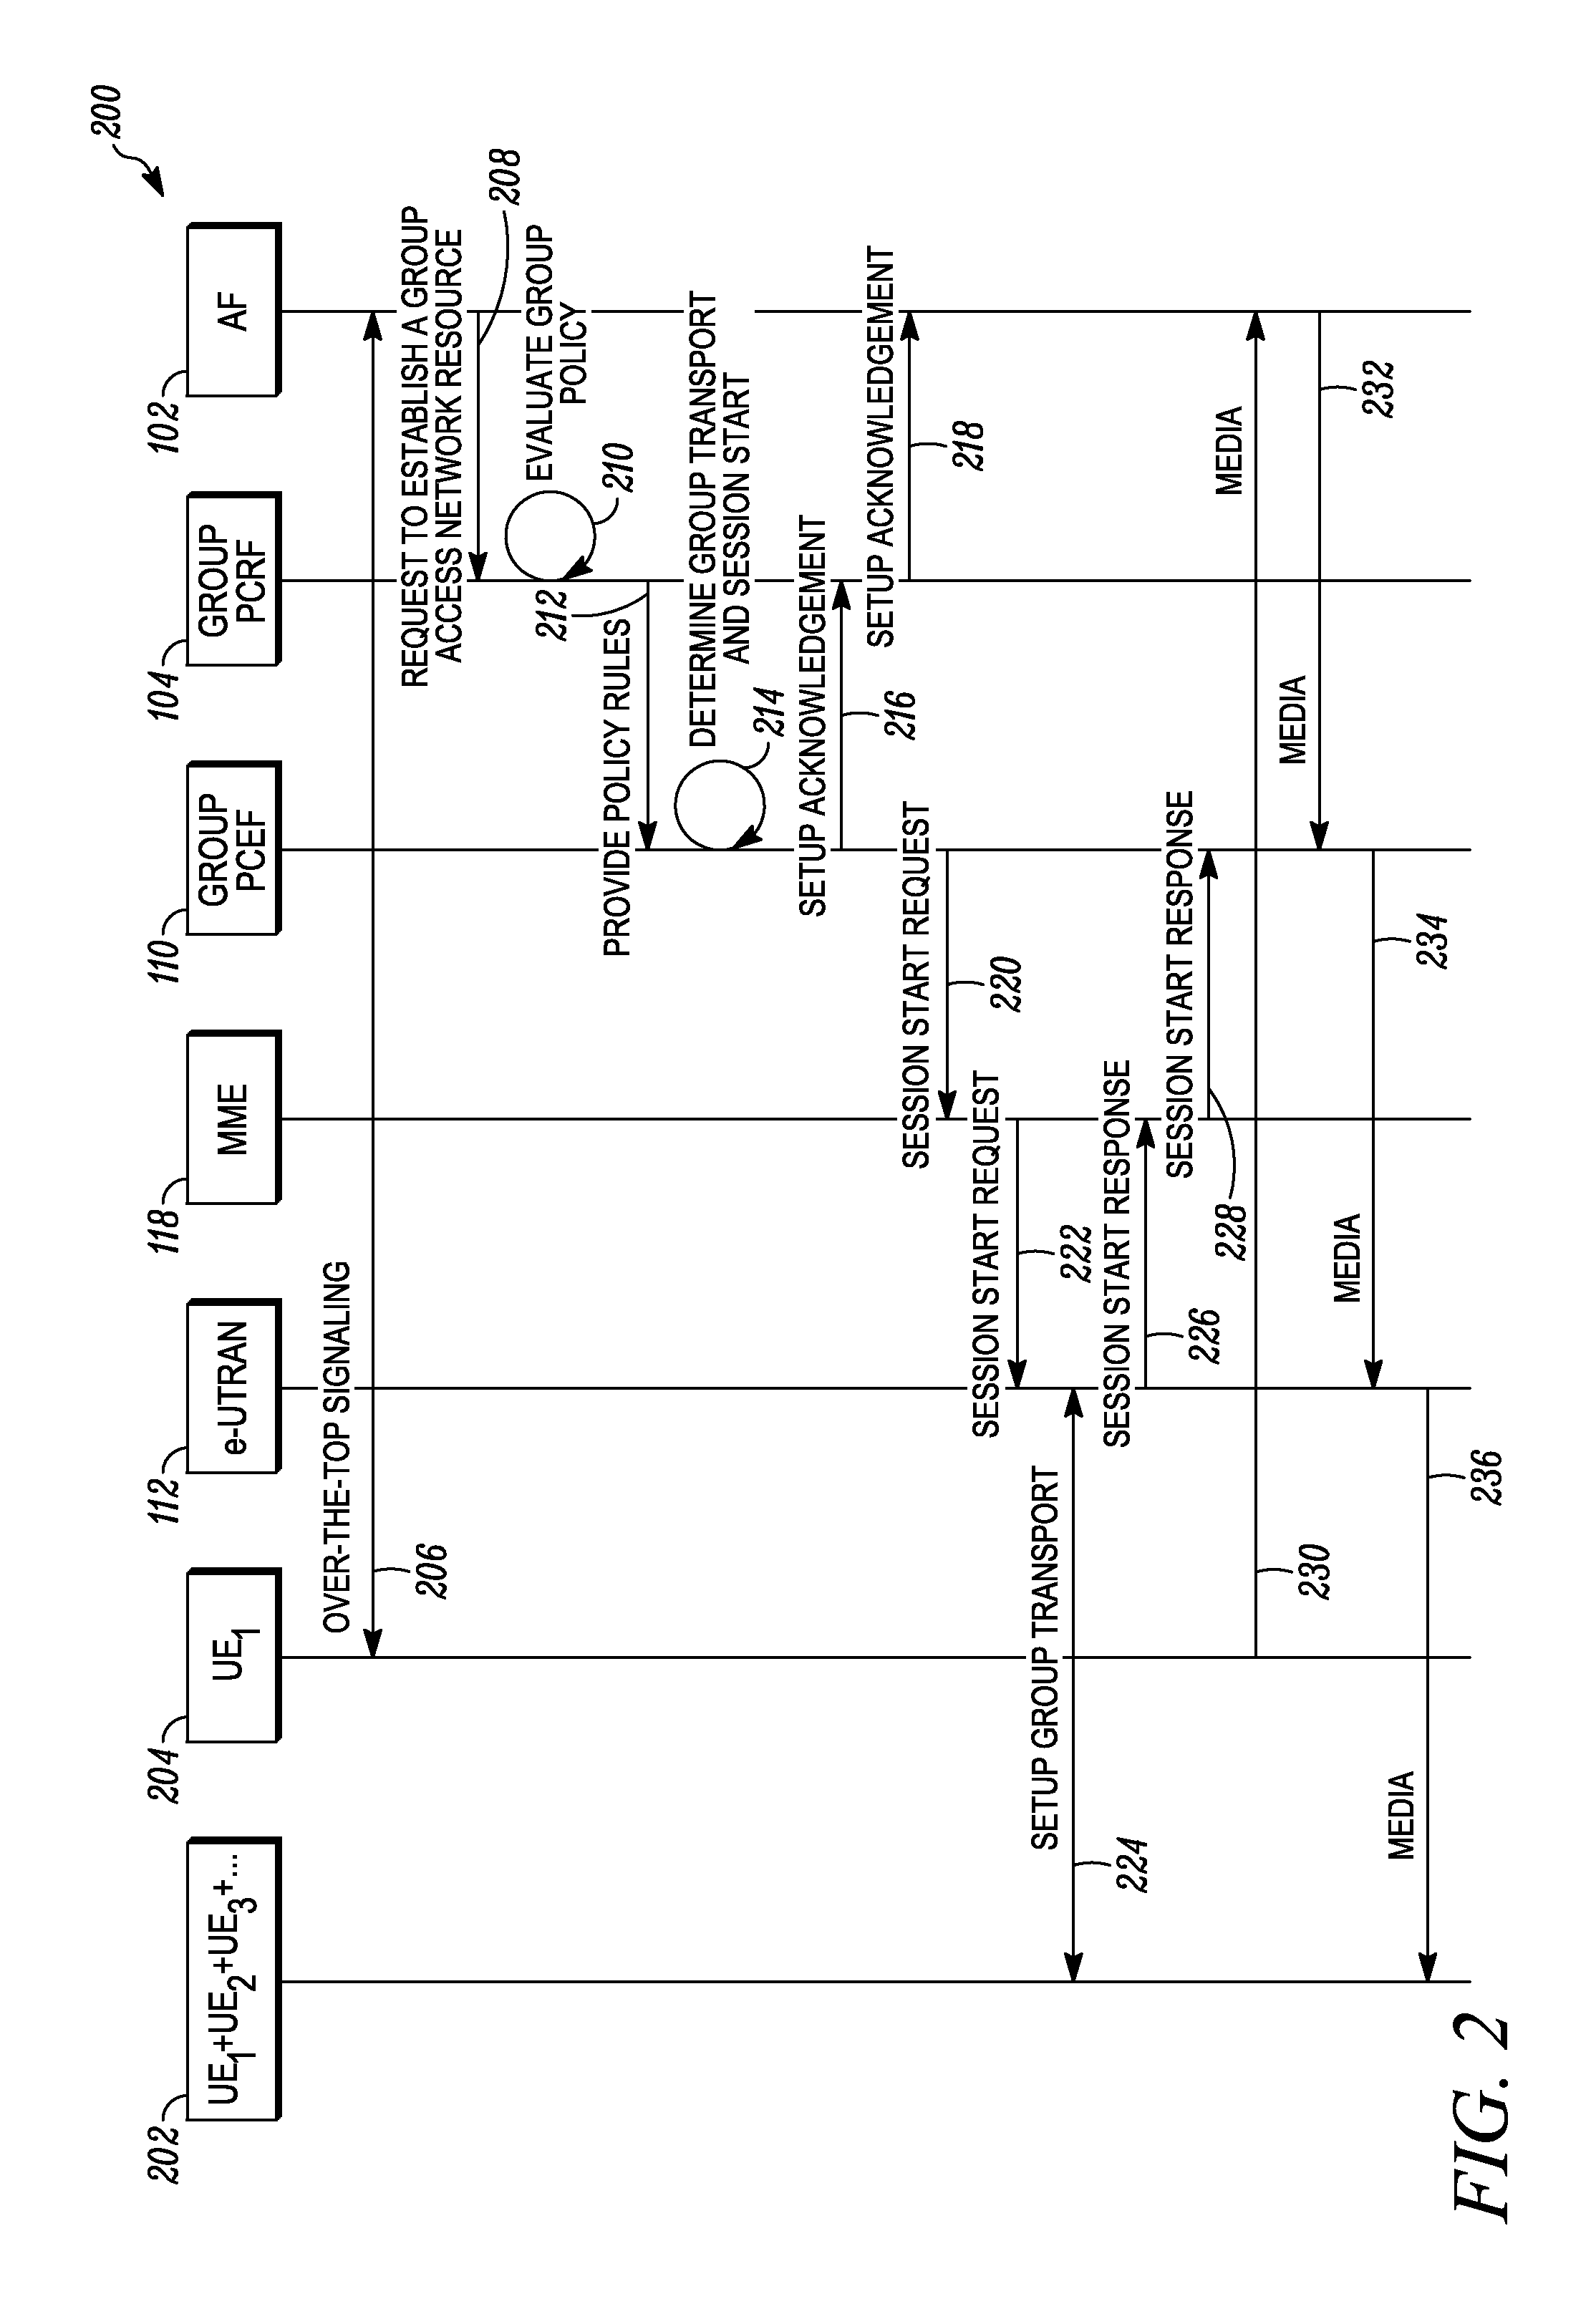 Method and apparatus for processing group event notifications and providing group policy in a communication system